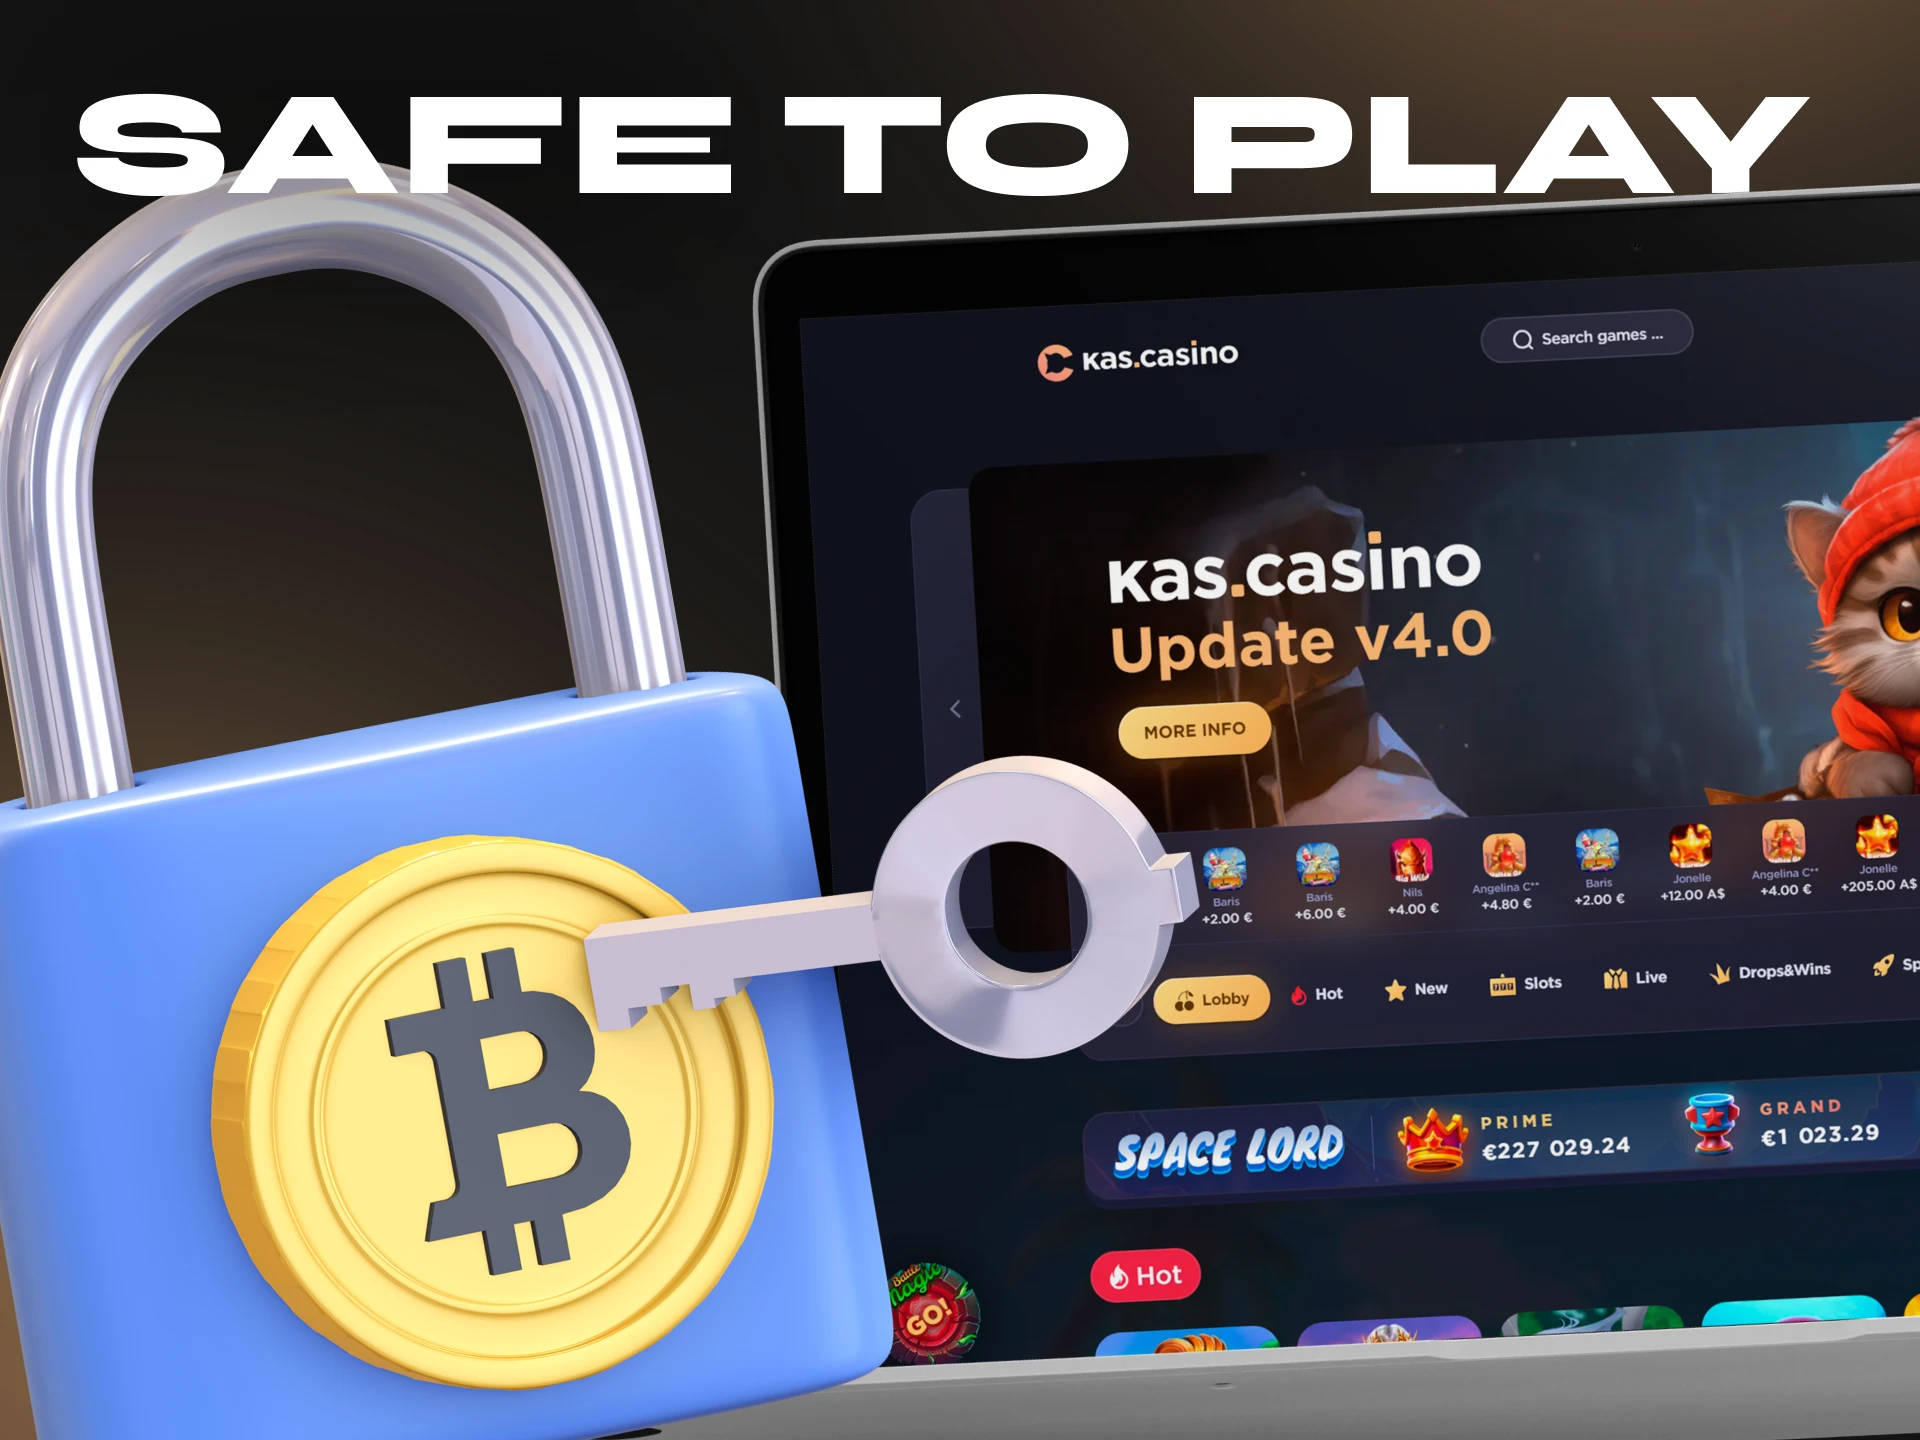 The gaming process at Kas Casino is safe for its users.